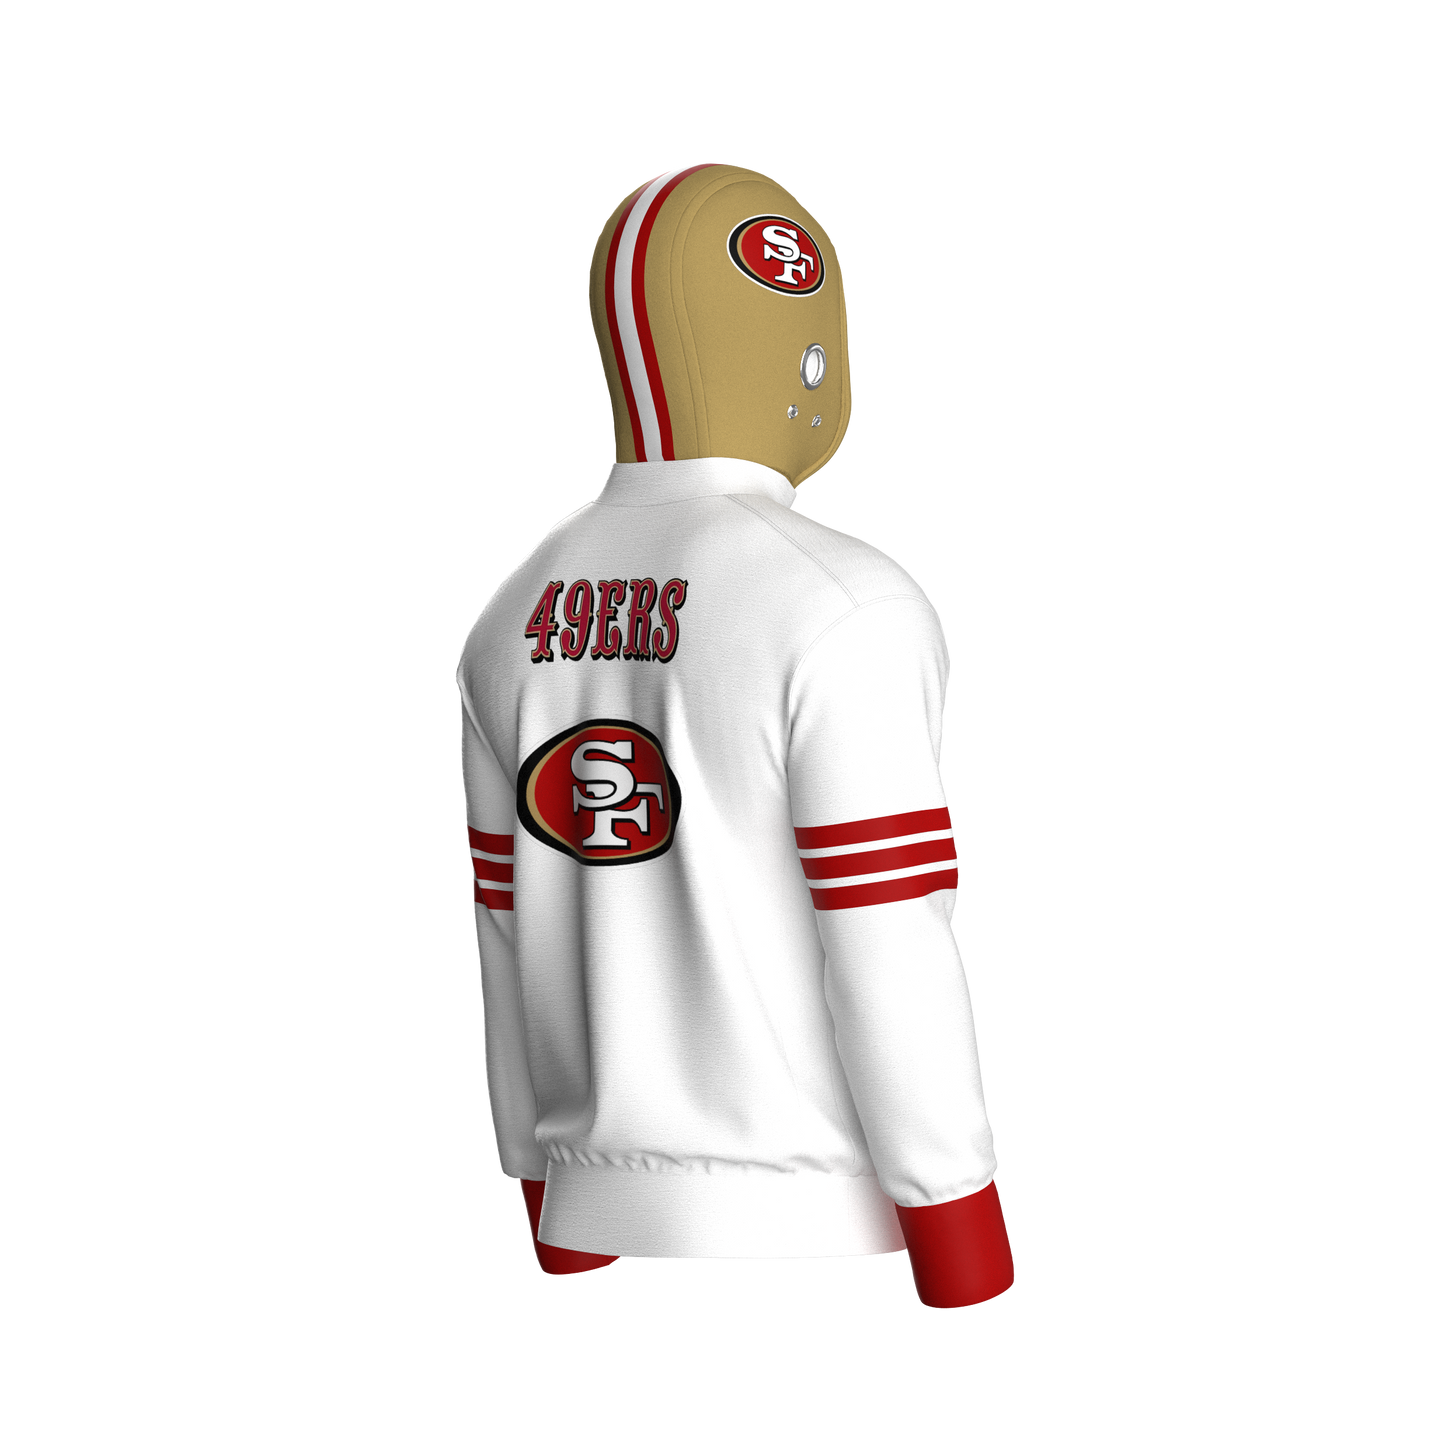 San Francisco 49ers Away Pullover (youth)